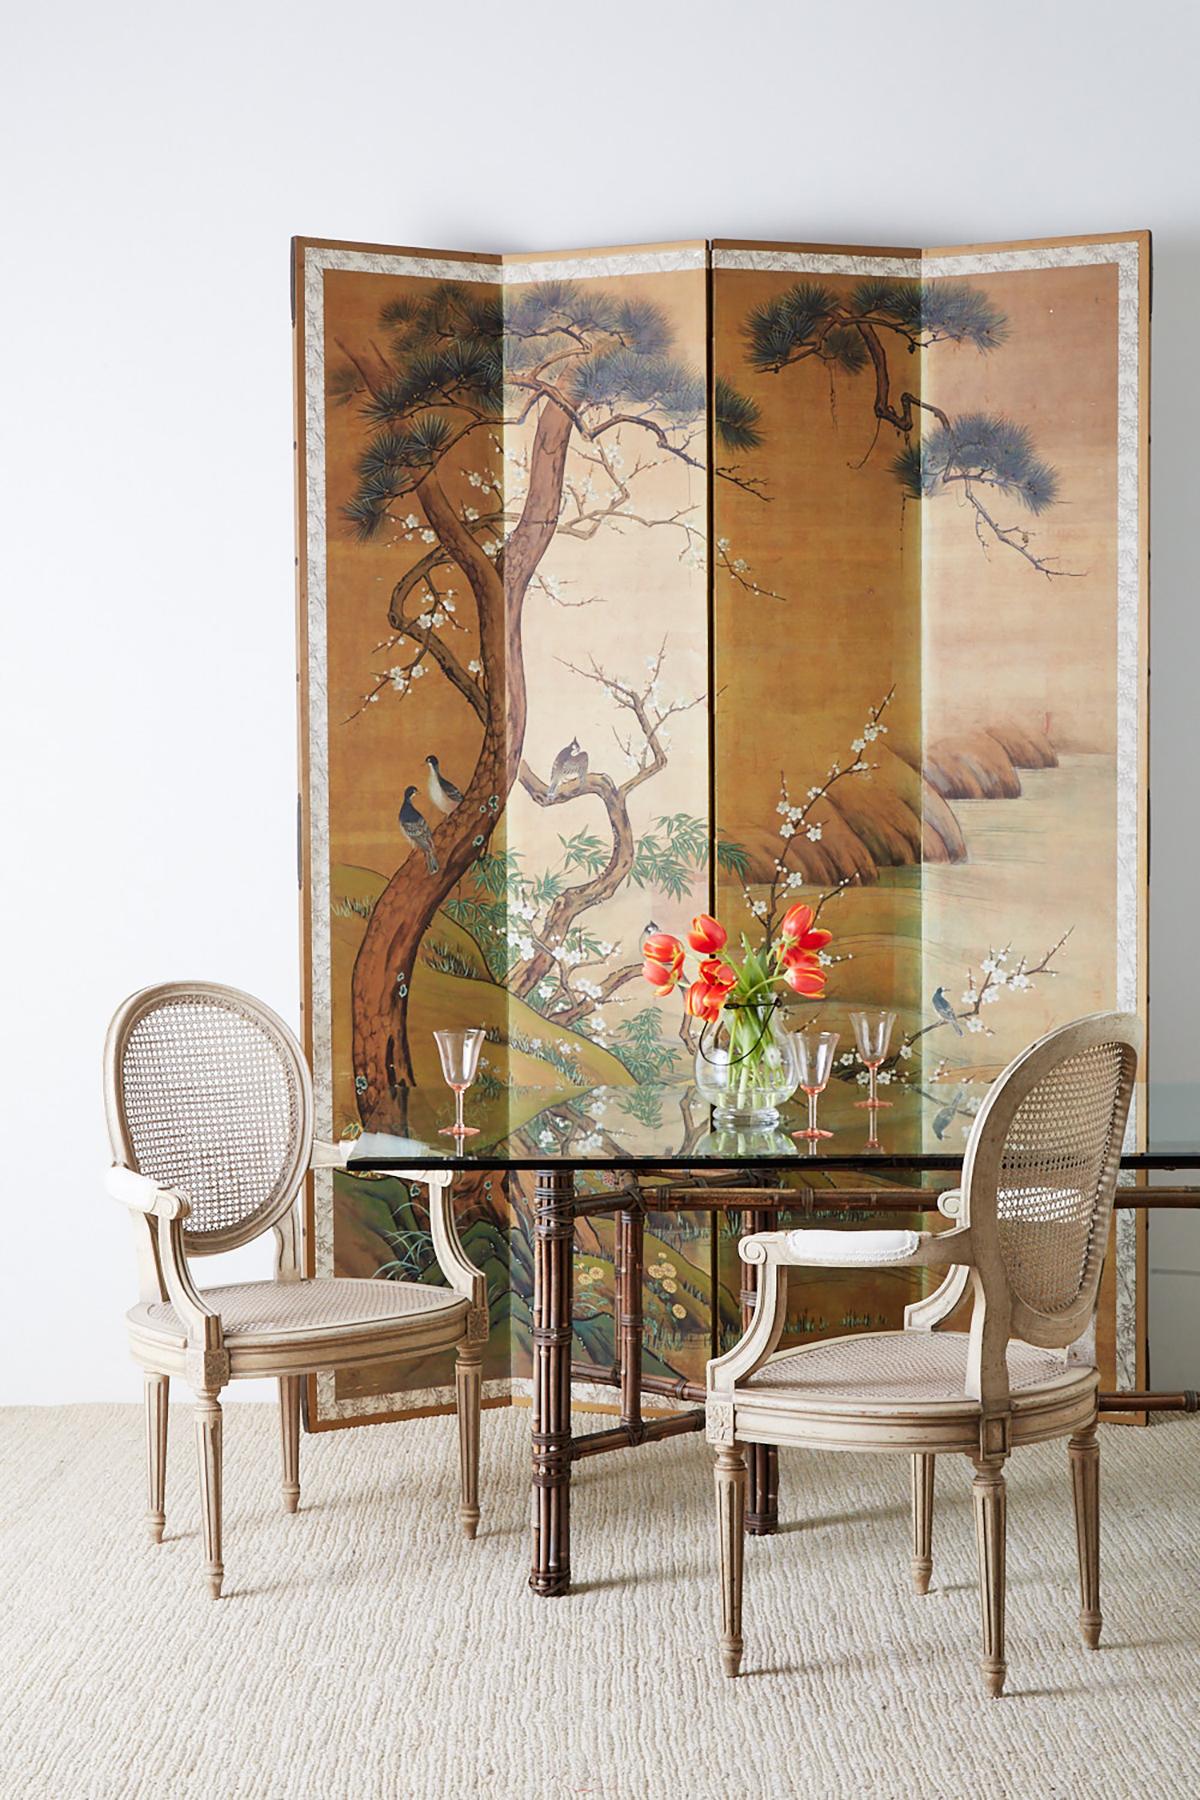 Monumental Japanese four-panel folding screen made in the Edo period style. Depicts an idyllic spring landscape scene with blooming Sakura Cherry blossoms and pine trees among flowers. There are several different birds in each tree. Signed and